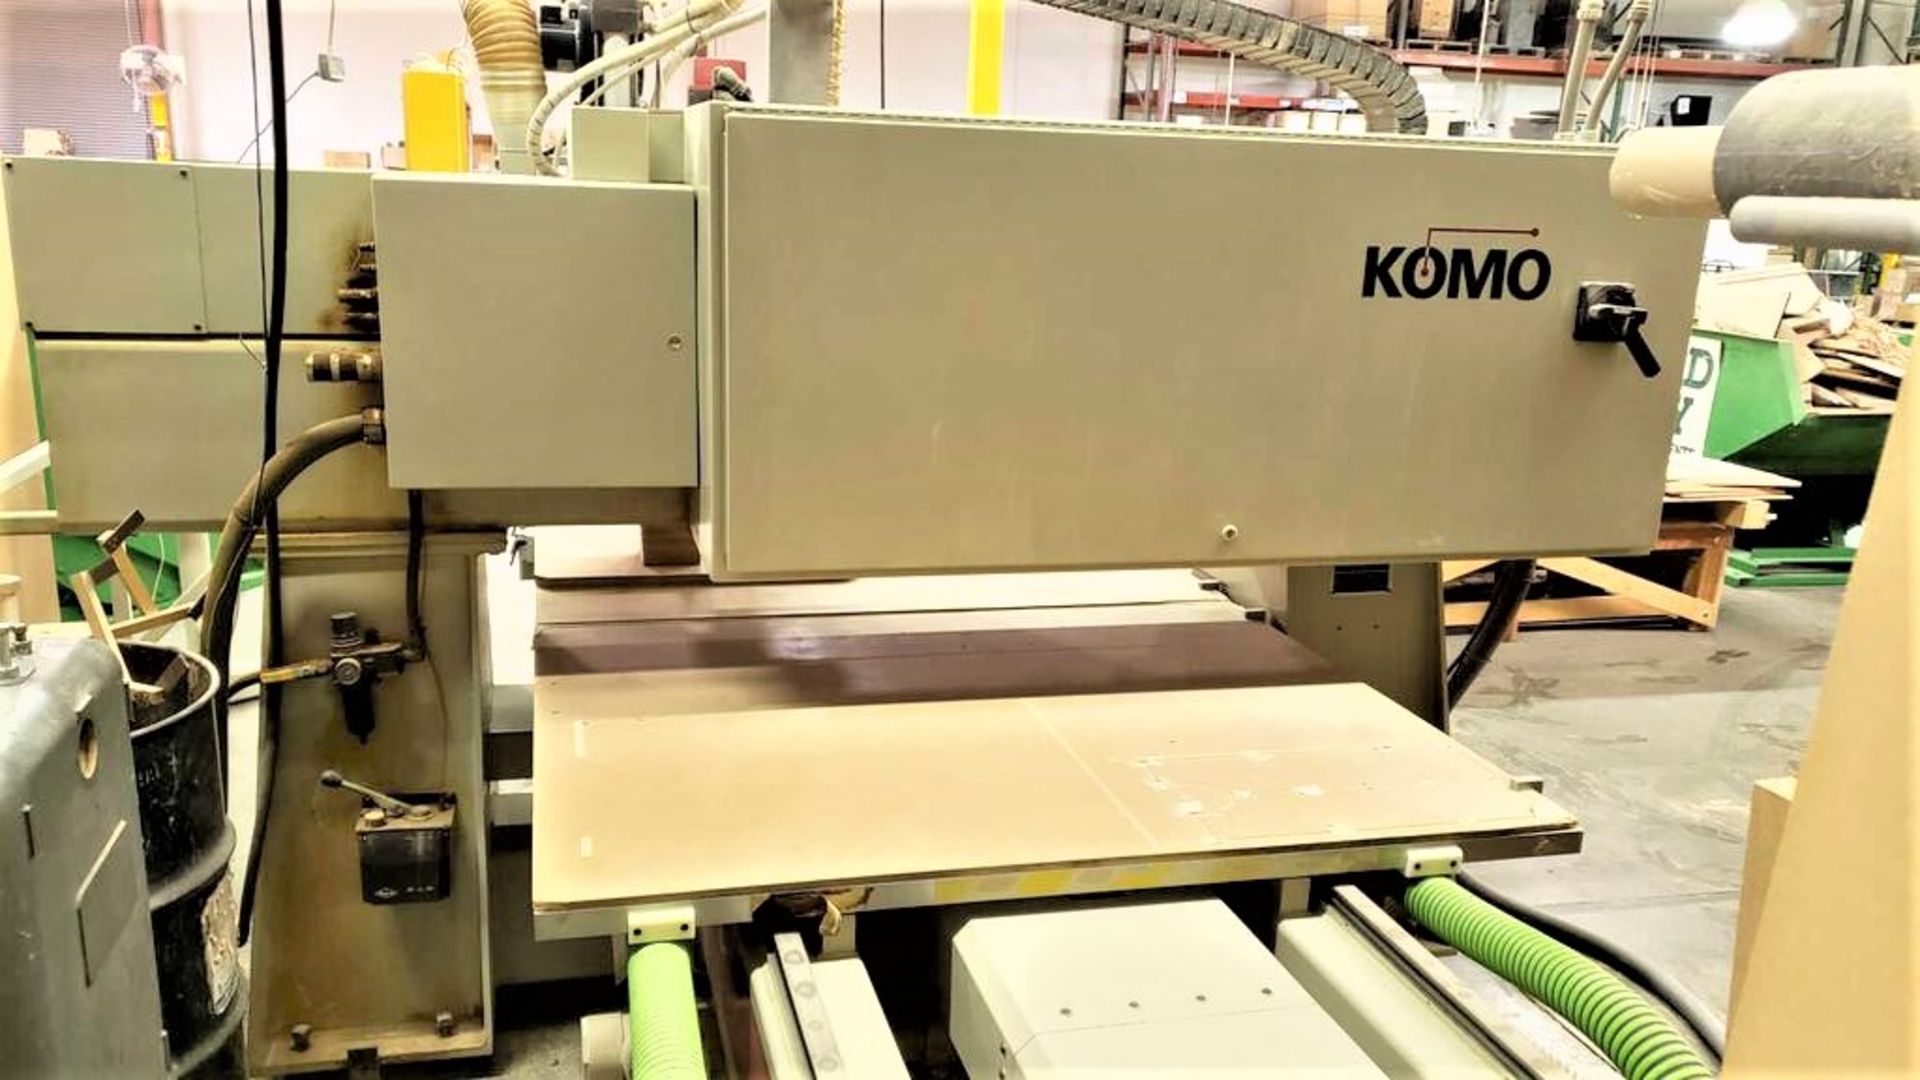 5'X8' Komo Model VR508 Mach II 3-Axis CNC Router, S/N 31780-03-01-00, New 2000 - Image 8 of 10